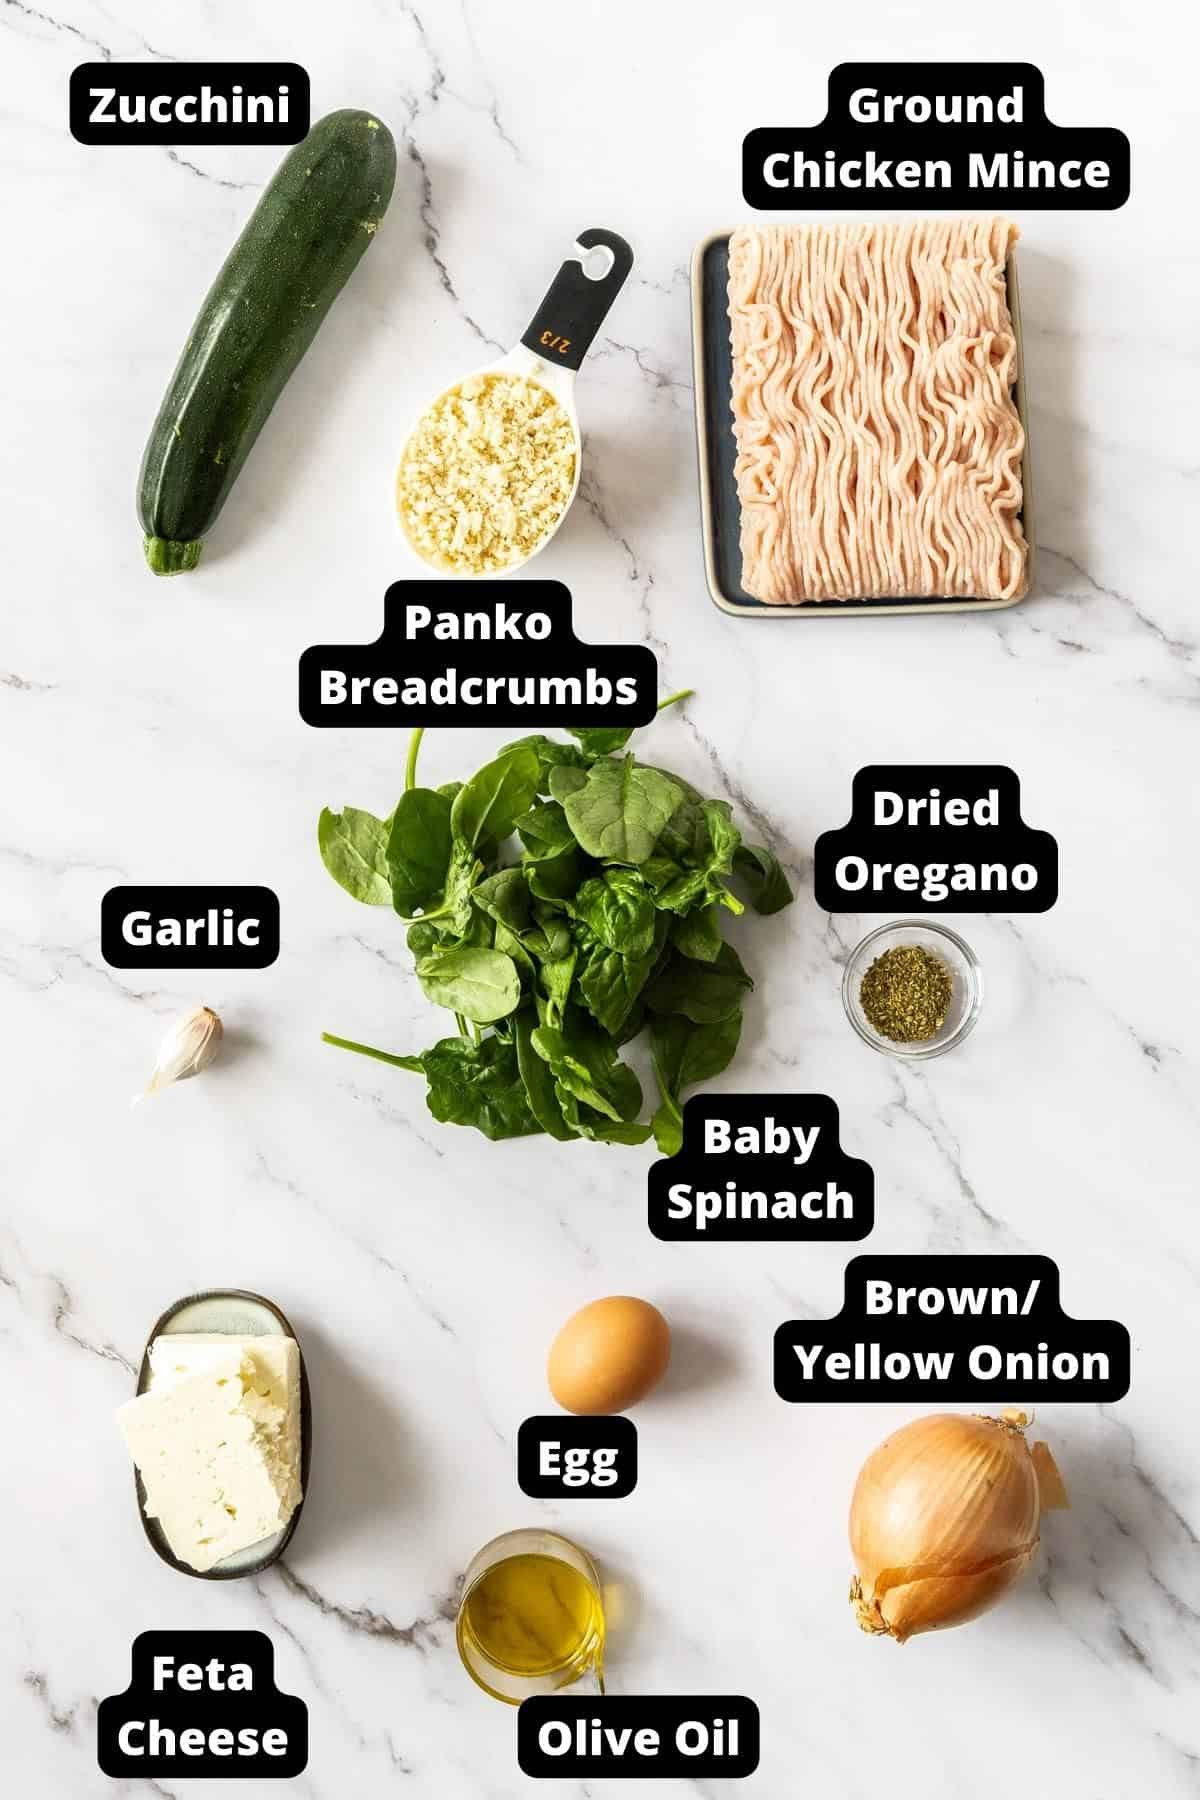 Ingredients in this recipe on a white marble background.